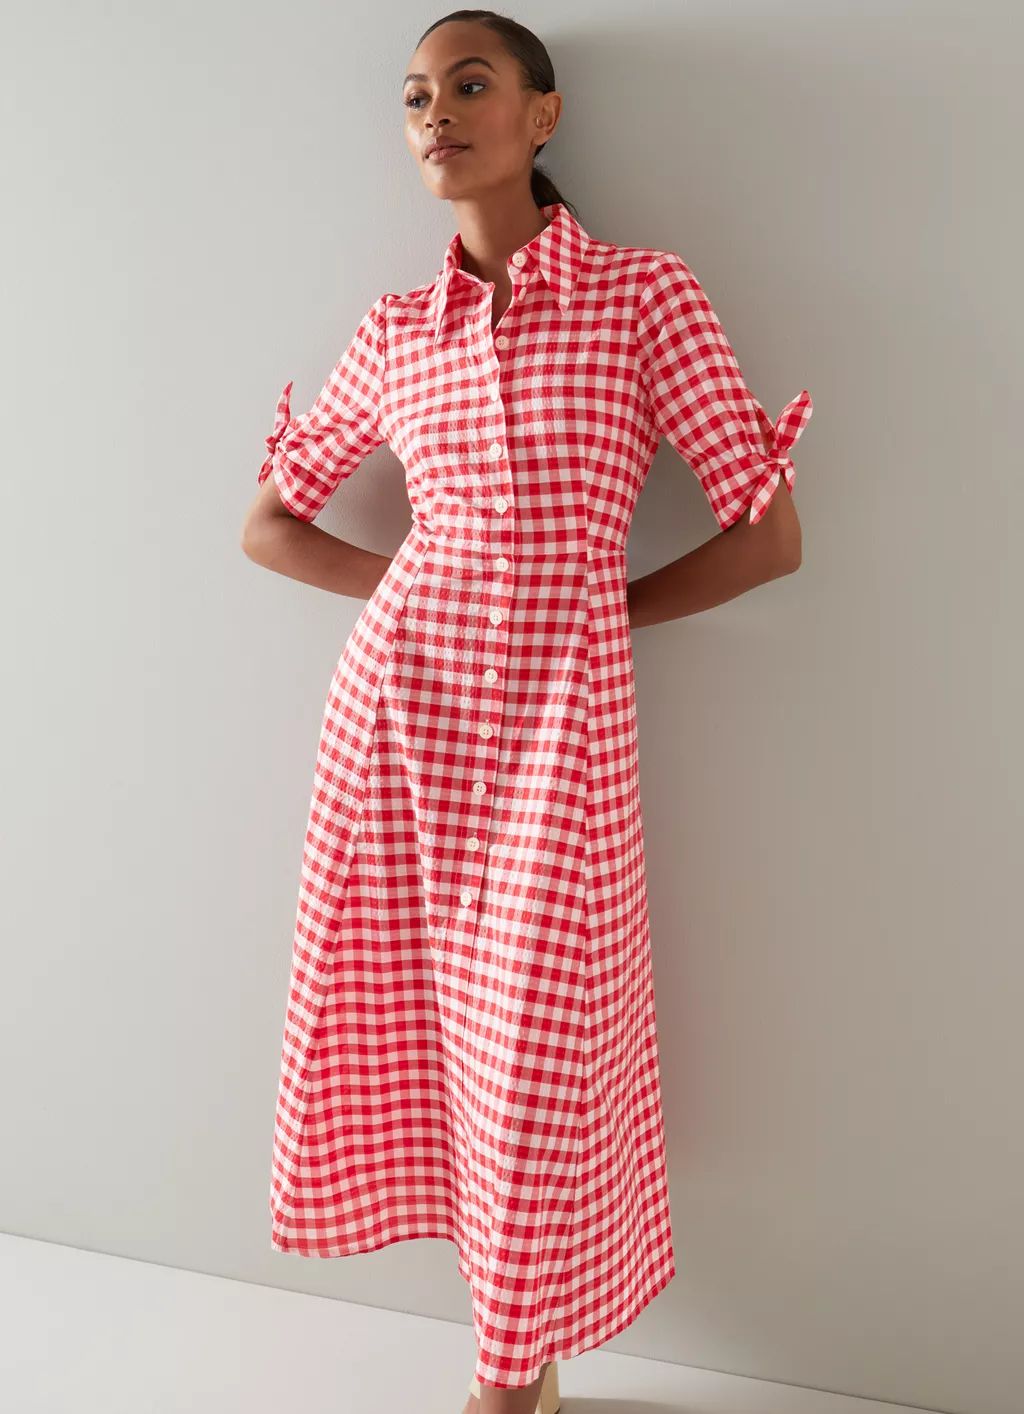 Saffron Red and White Checked Dress | View All | Clothing | Collections | L.K.Bennett, London | L.K. Bennett (UK)